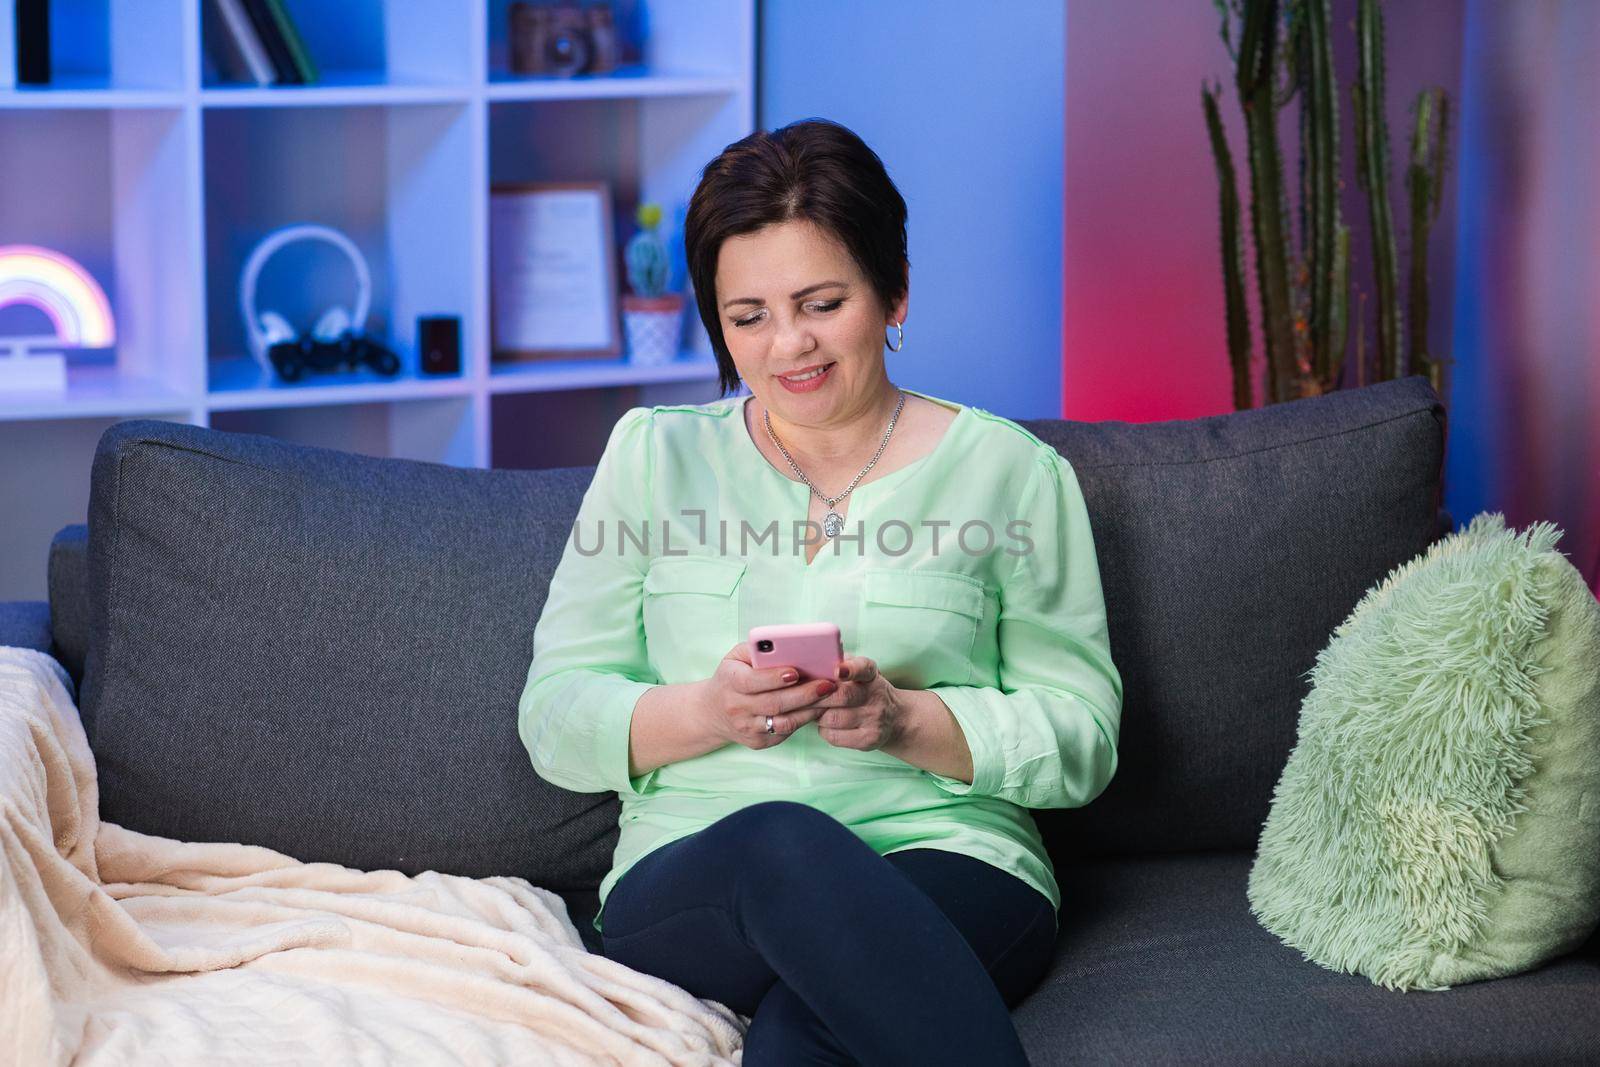 Senior Caucasian Woman with Short Black Hair Sitting on Couch at Home, Holding Invisible Smartphone in Hand and Chatting with Someone